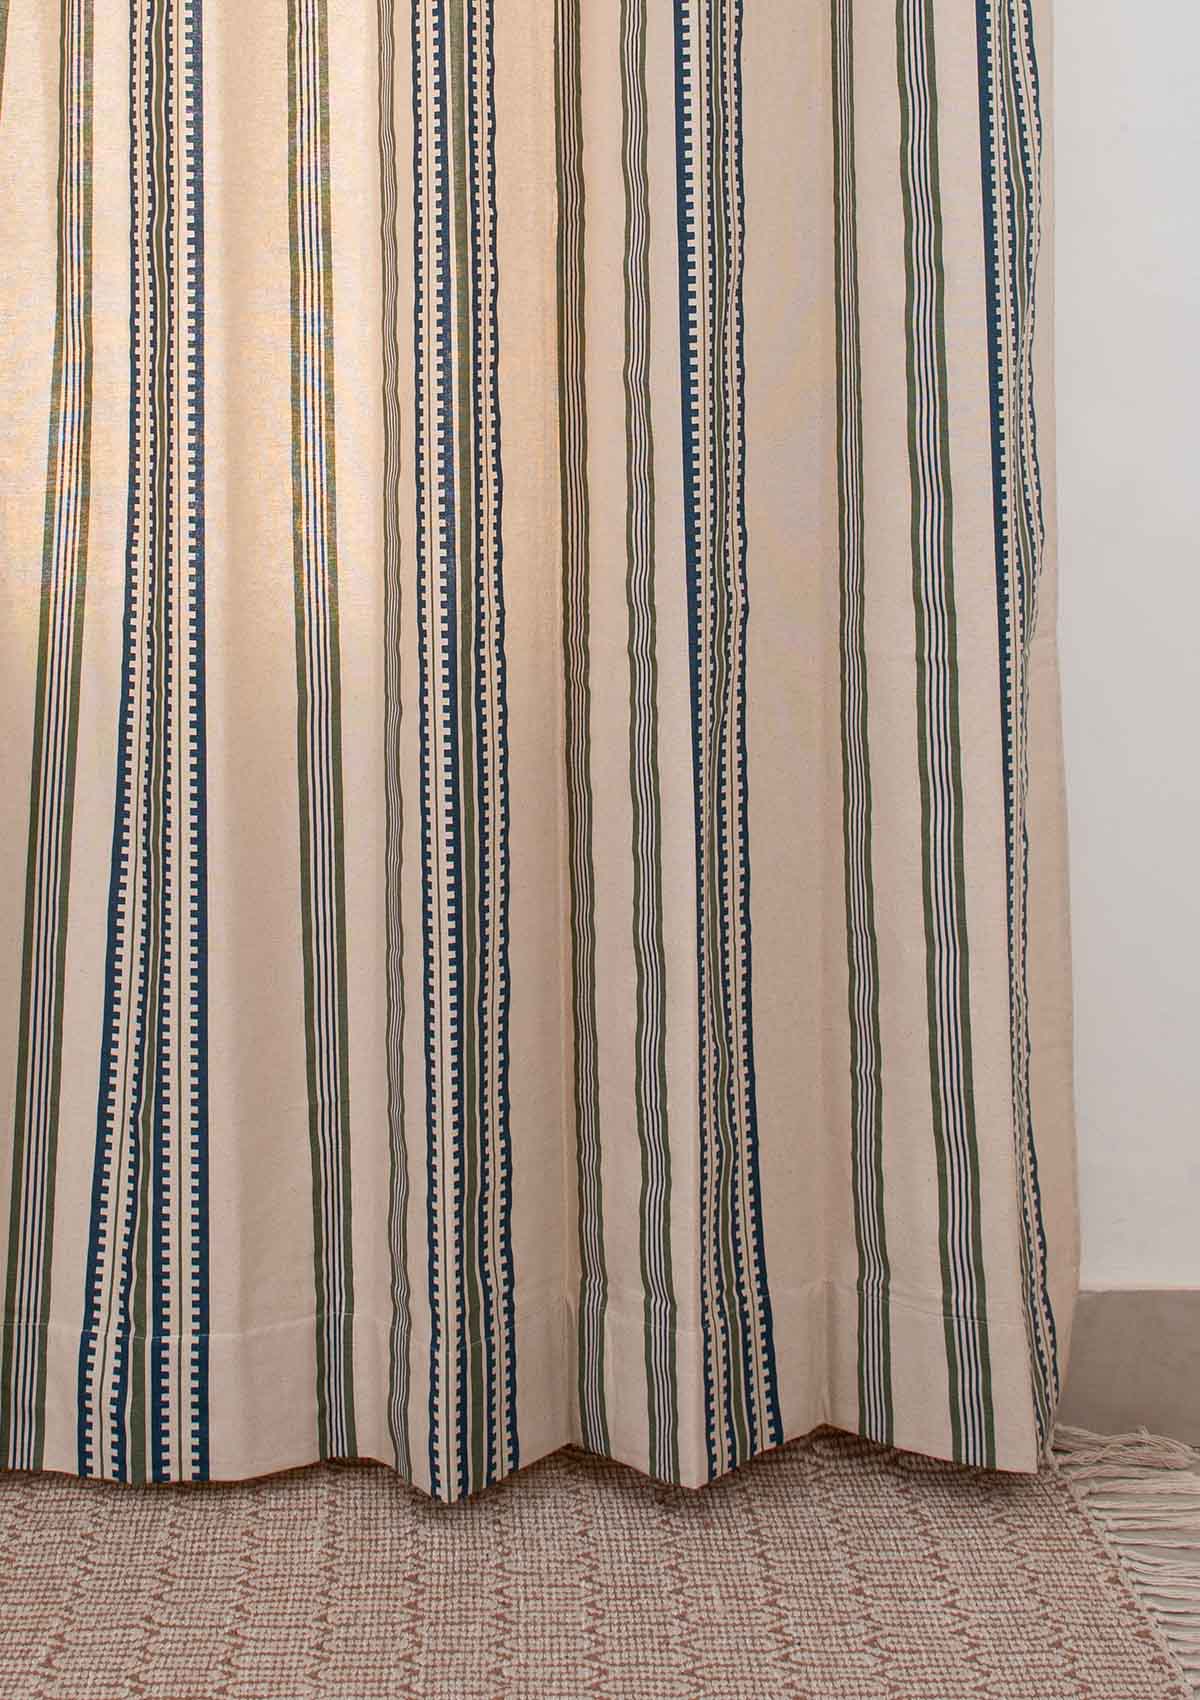 Roman Stripes 100% Customizable Cotton geometric curtain for bed room - Room darkening - Pepper Green and Night Blue